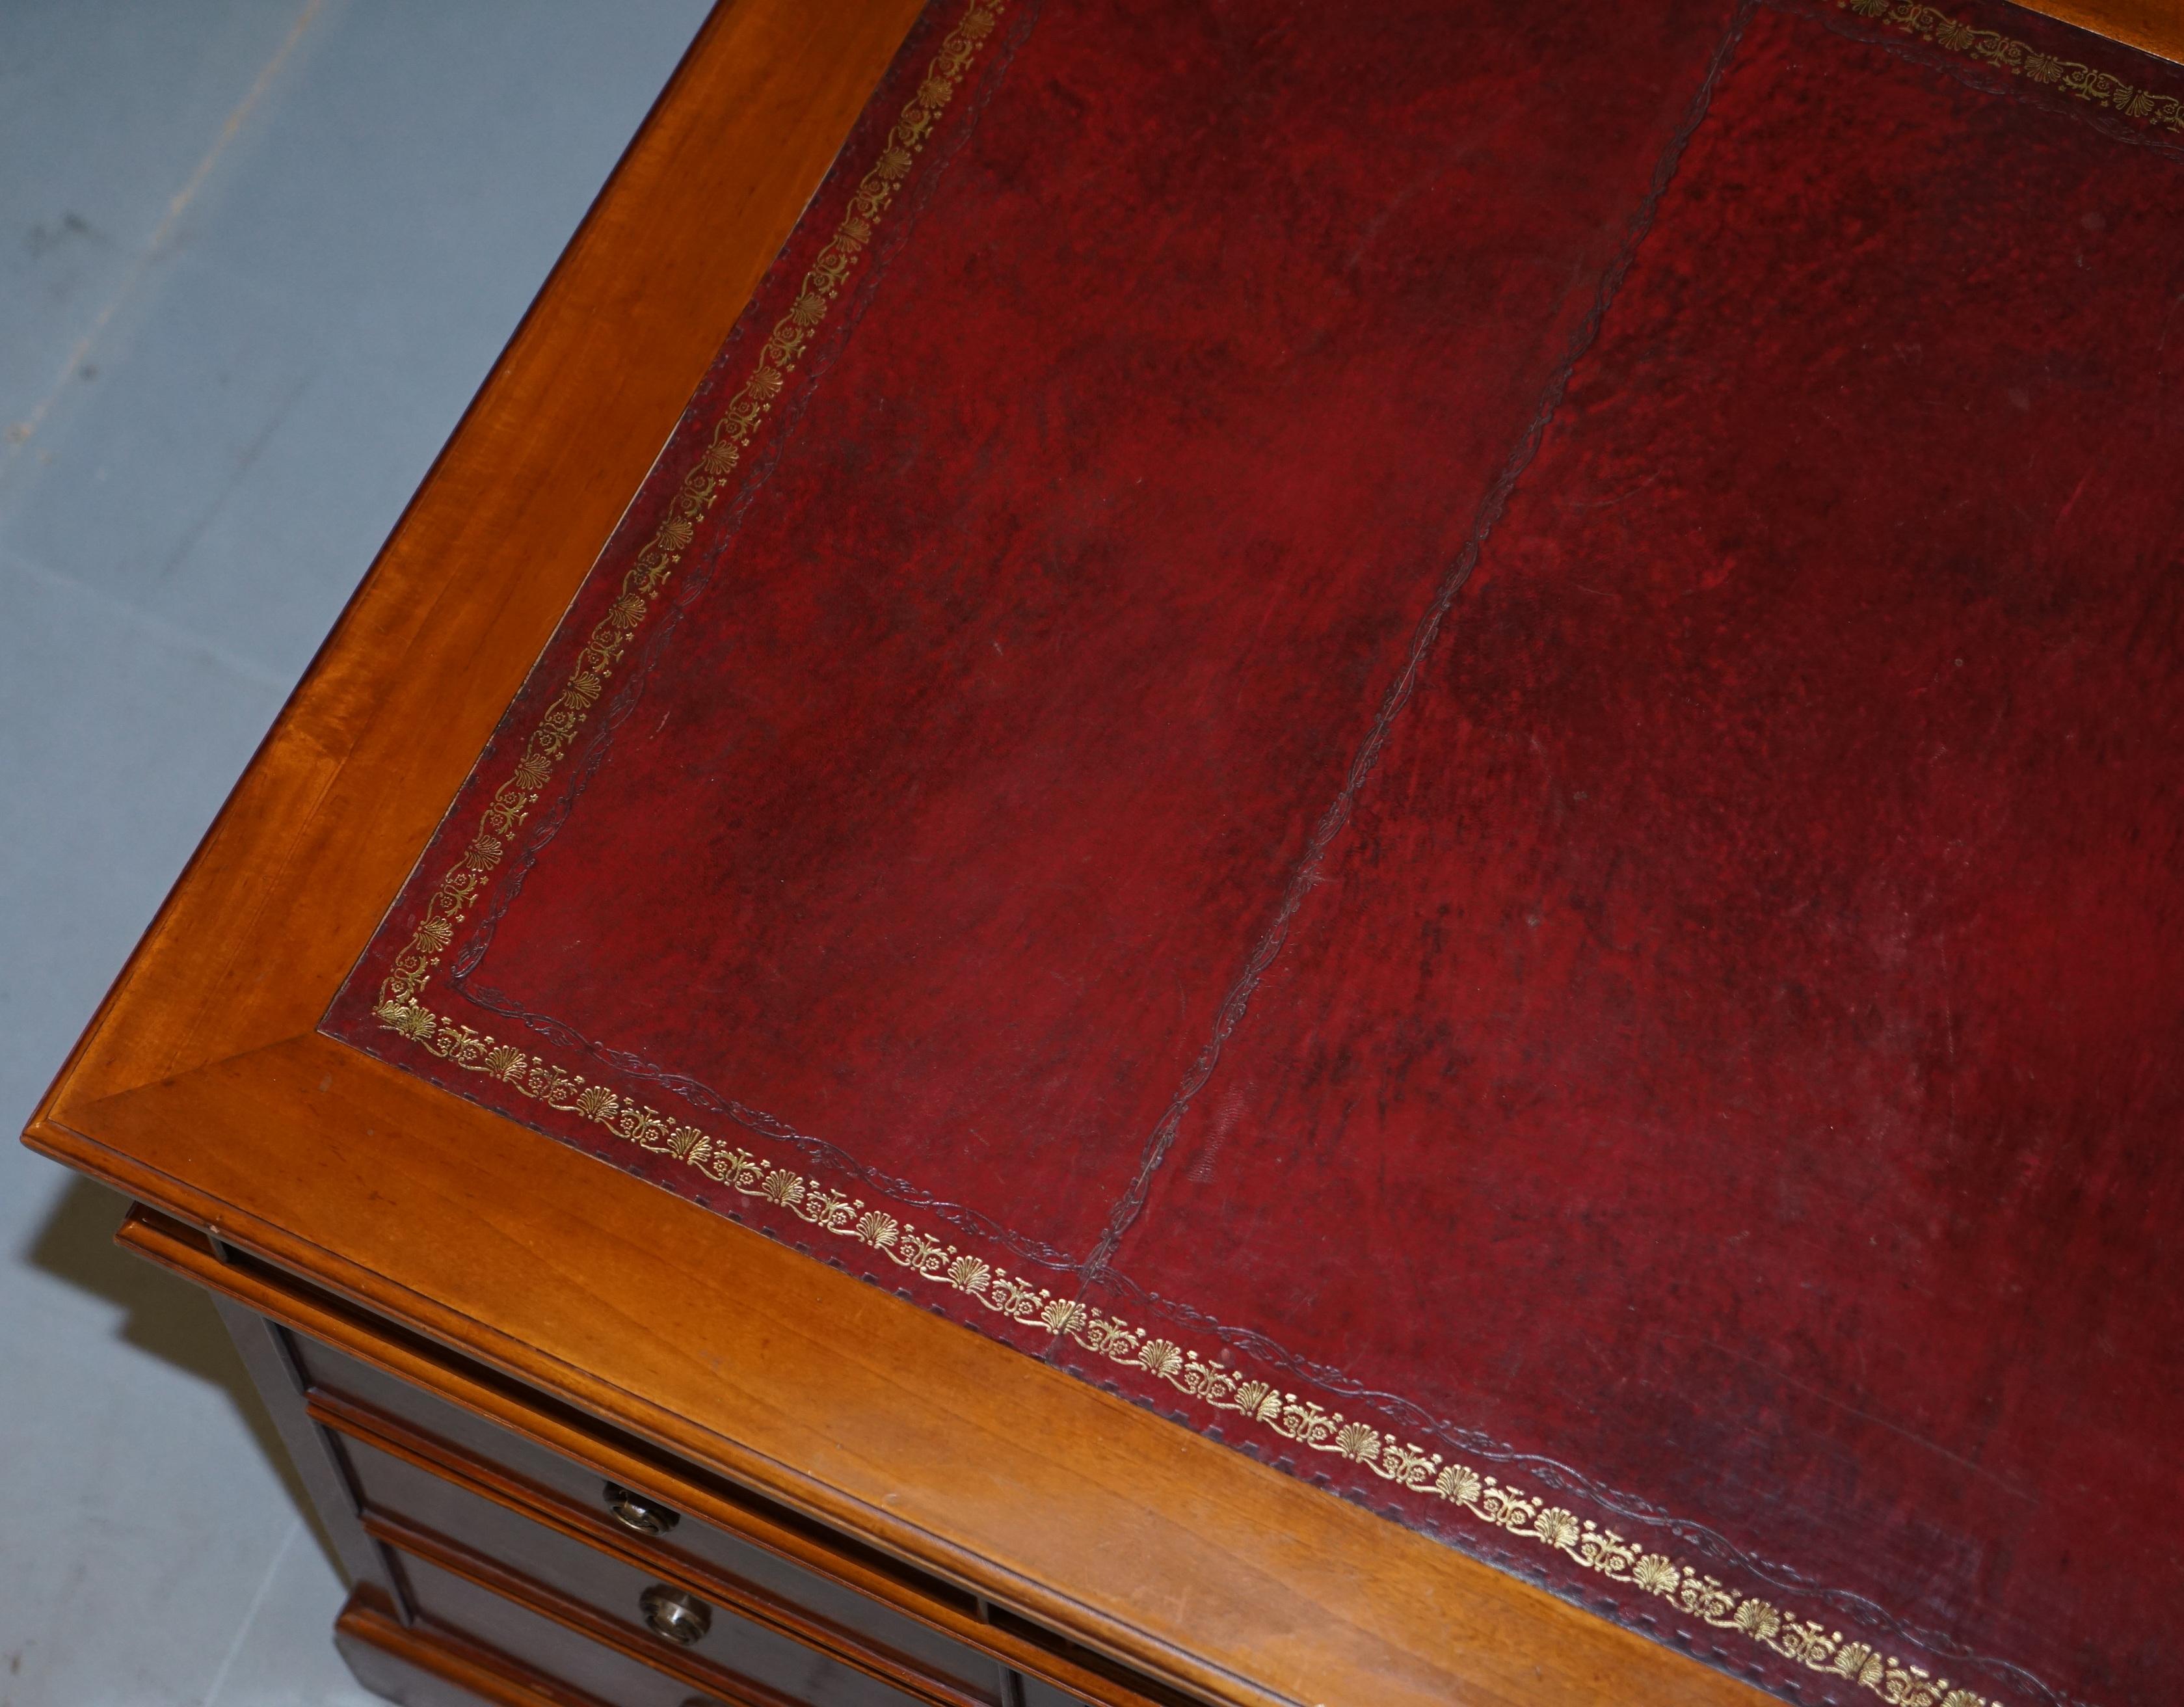 Panelled Cherry Wood Twin Pedestal Partner Desk Oxblood Leather Writing Surface 8